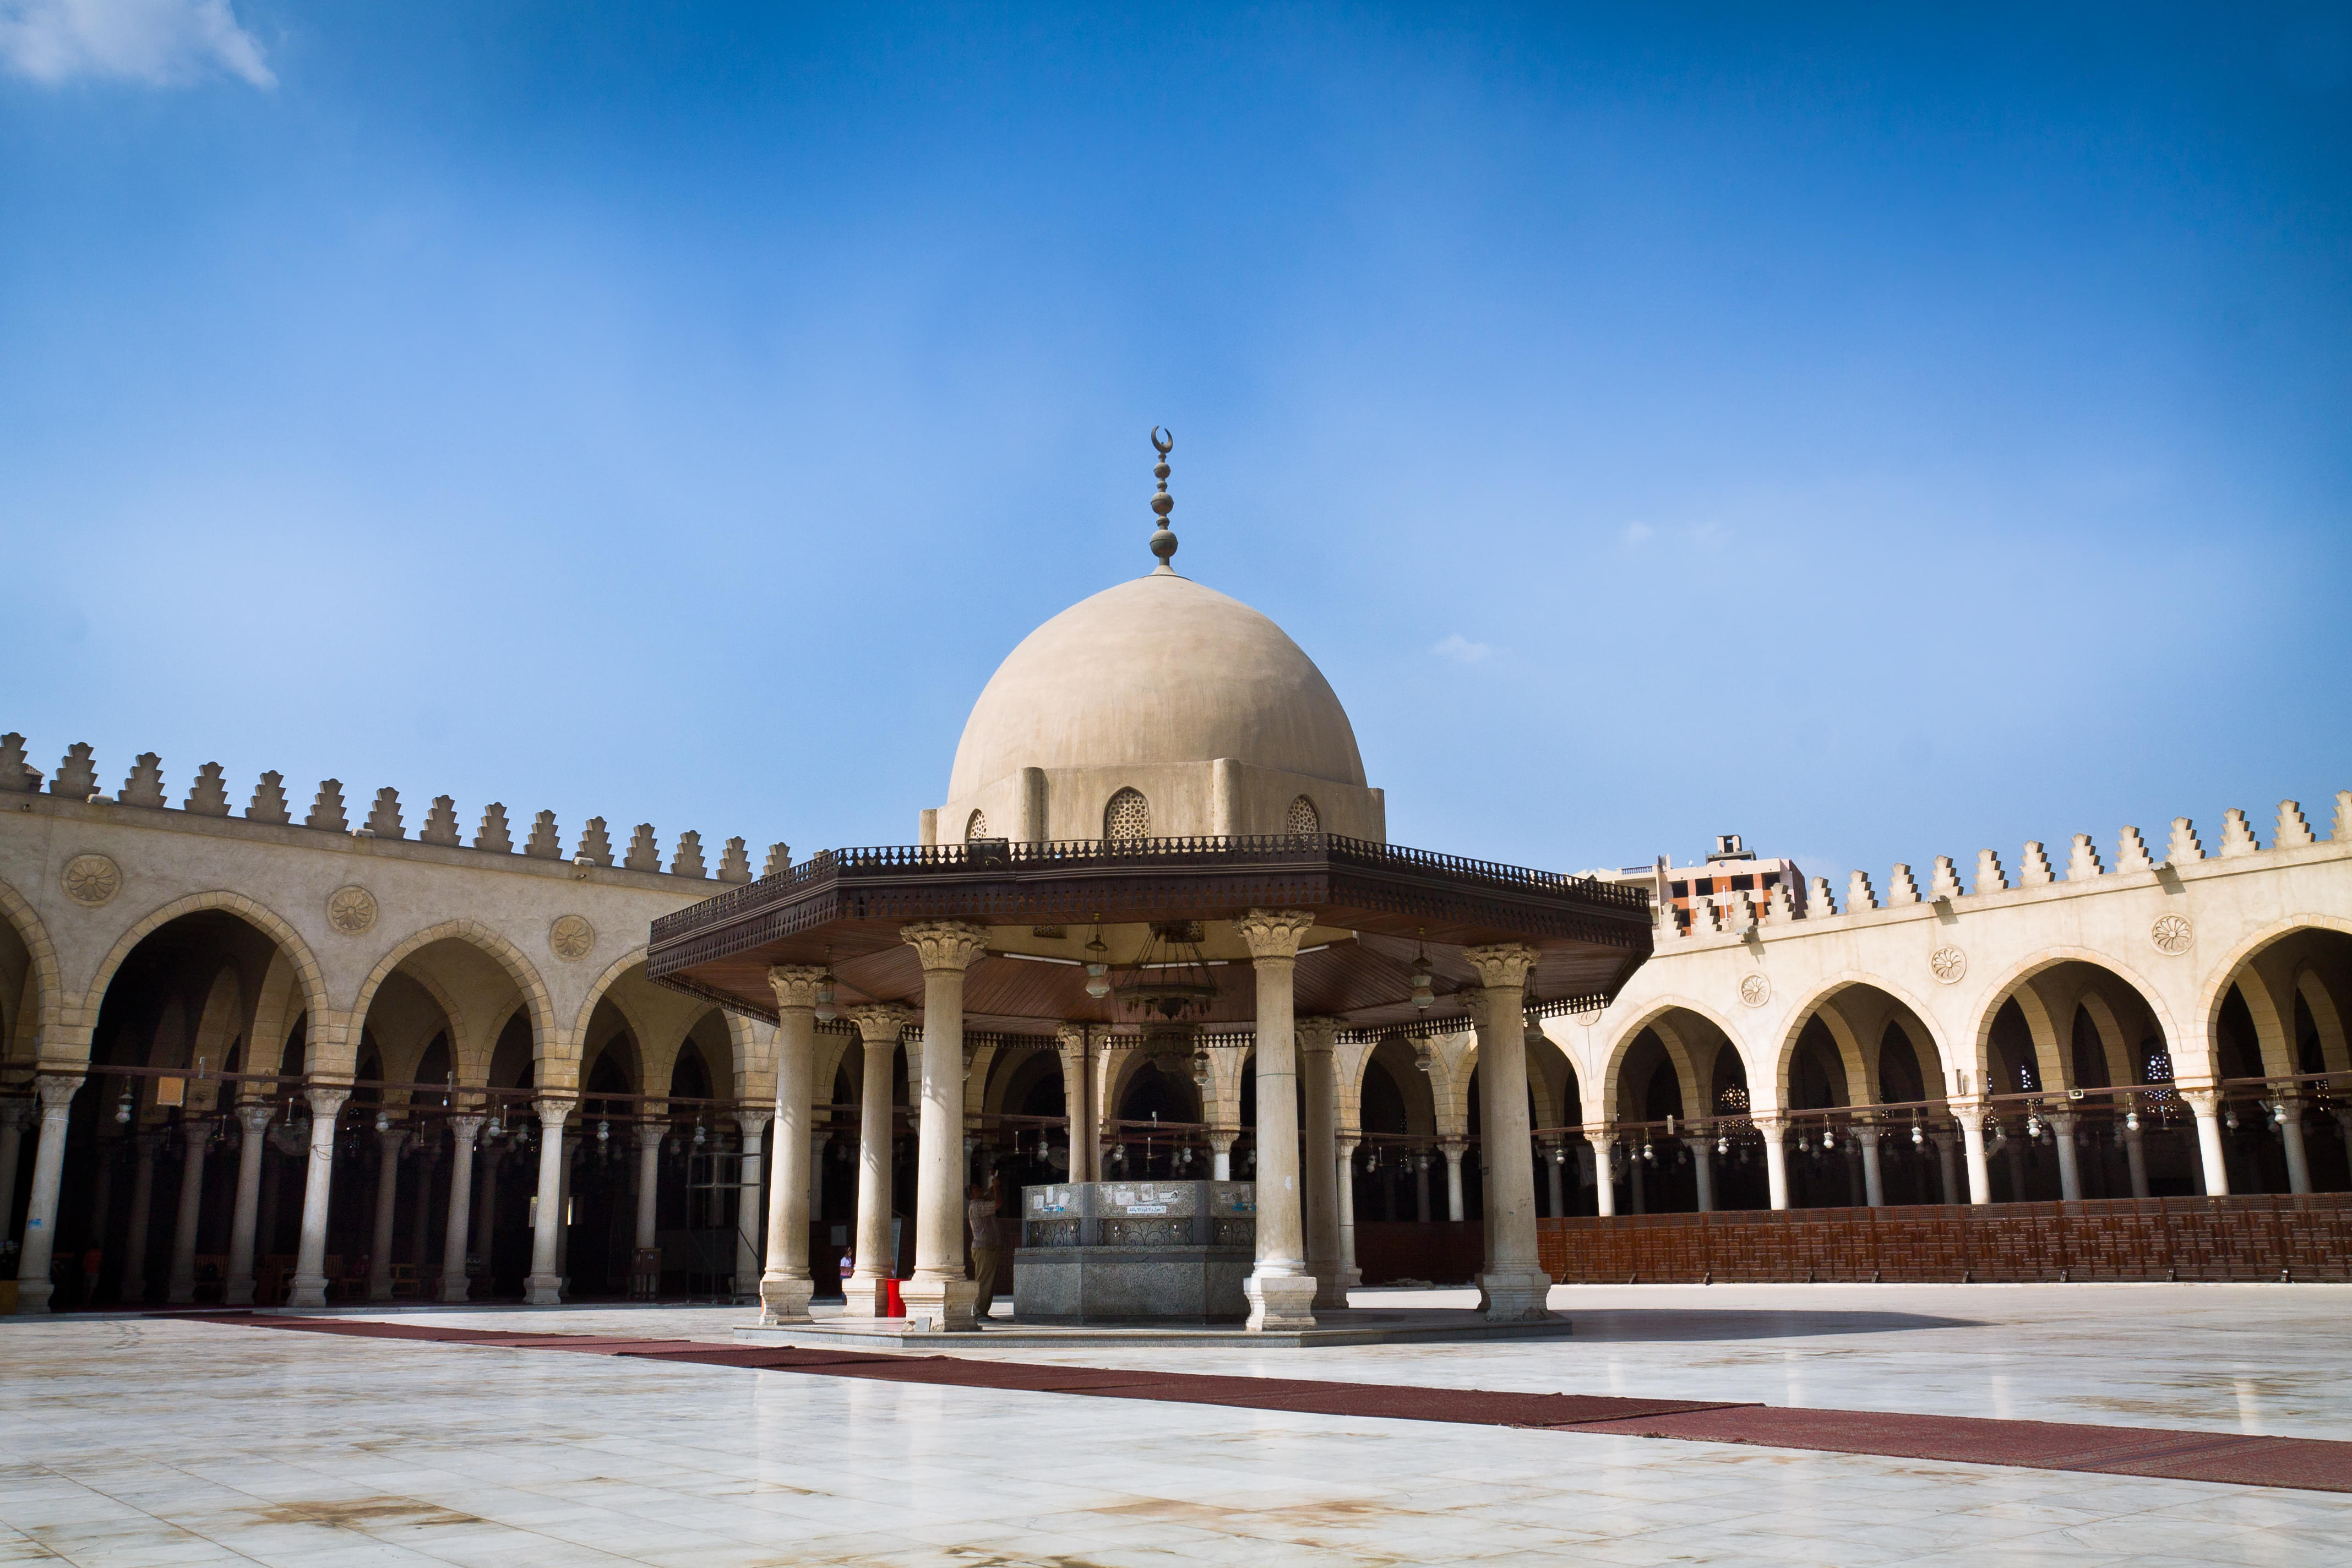 Visit the oldest surviving mosque of Egypt